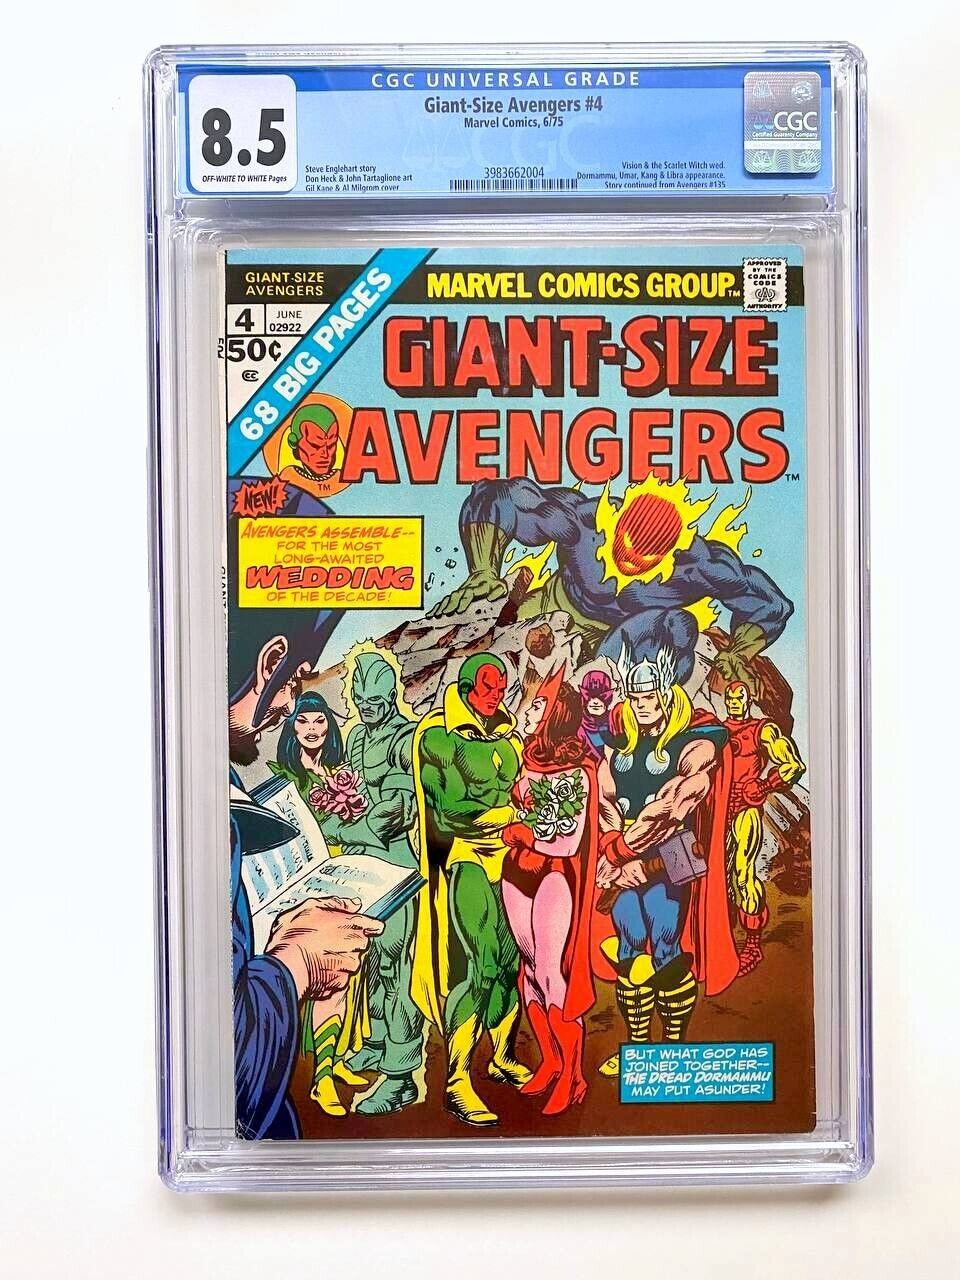 GIANT-SIZE AVENGERS #4 CGC 8.5 (1975) Vision and Scarlet Witch wedding